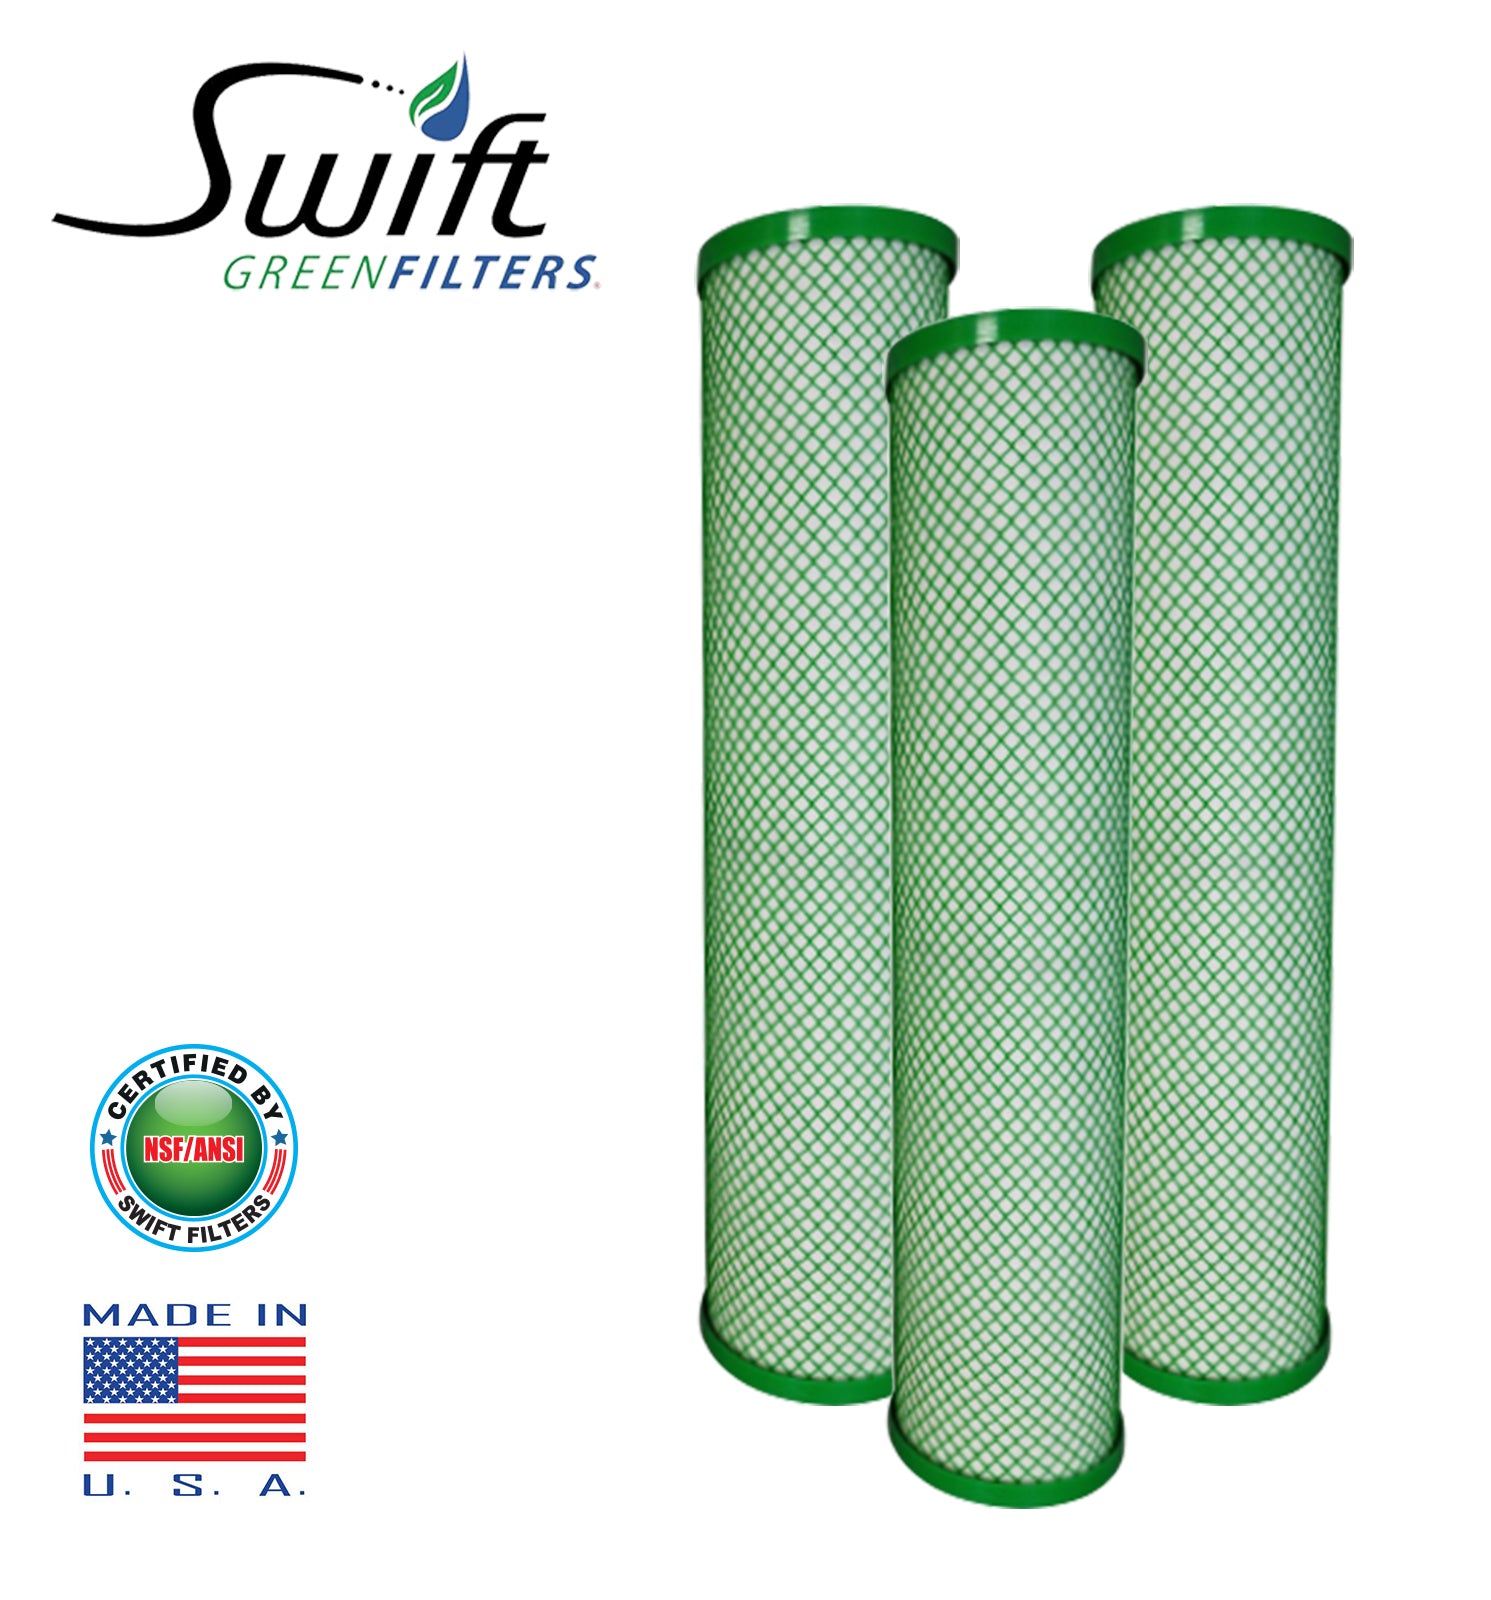 Swift (SGF20CL2) 20"x 2.75" CL2 Green Block Carbon Filter 10 Micron By Swift Green Filters